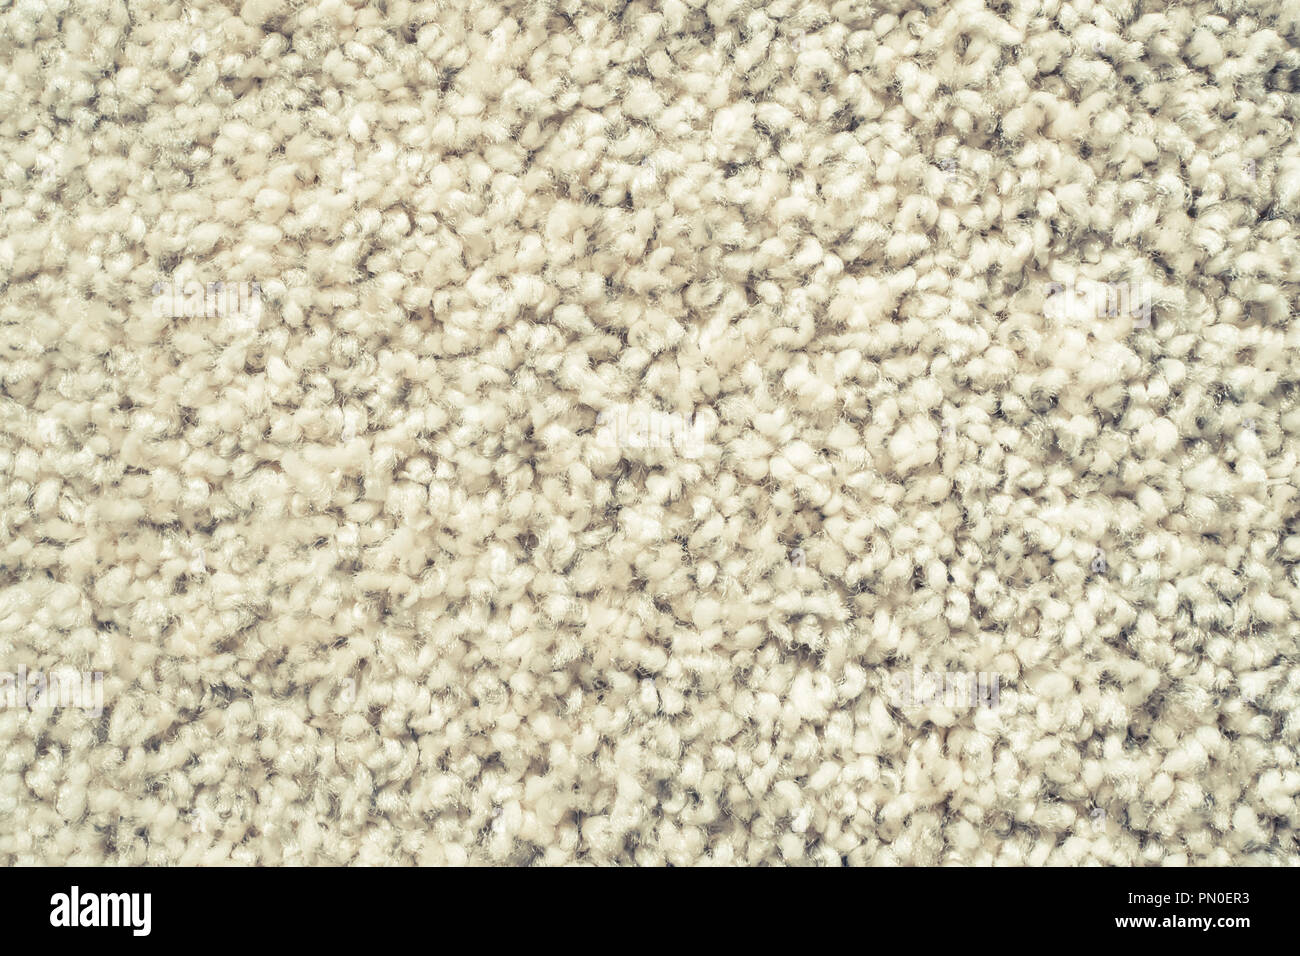 close up detail of absorbent fabric or shaggy white carpet, hairy carpet detail. absorbent fabric background. Stock Photo